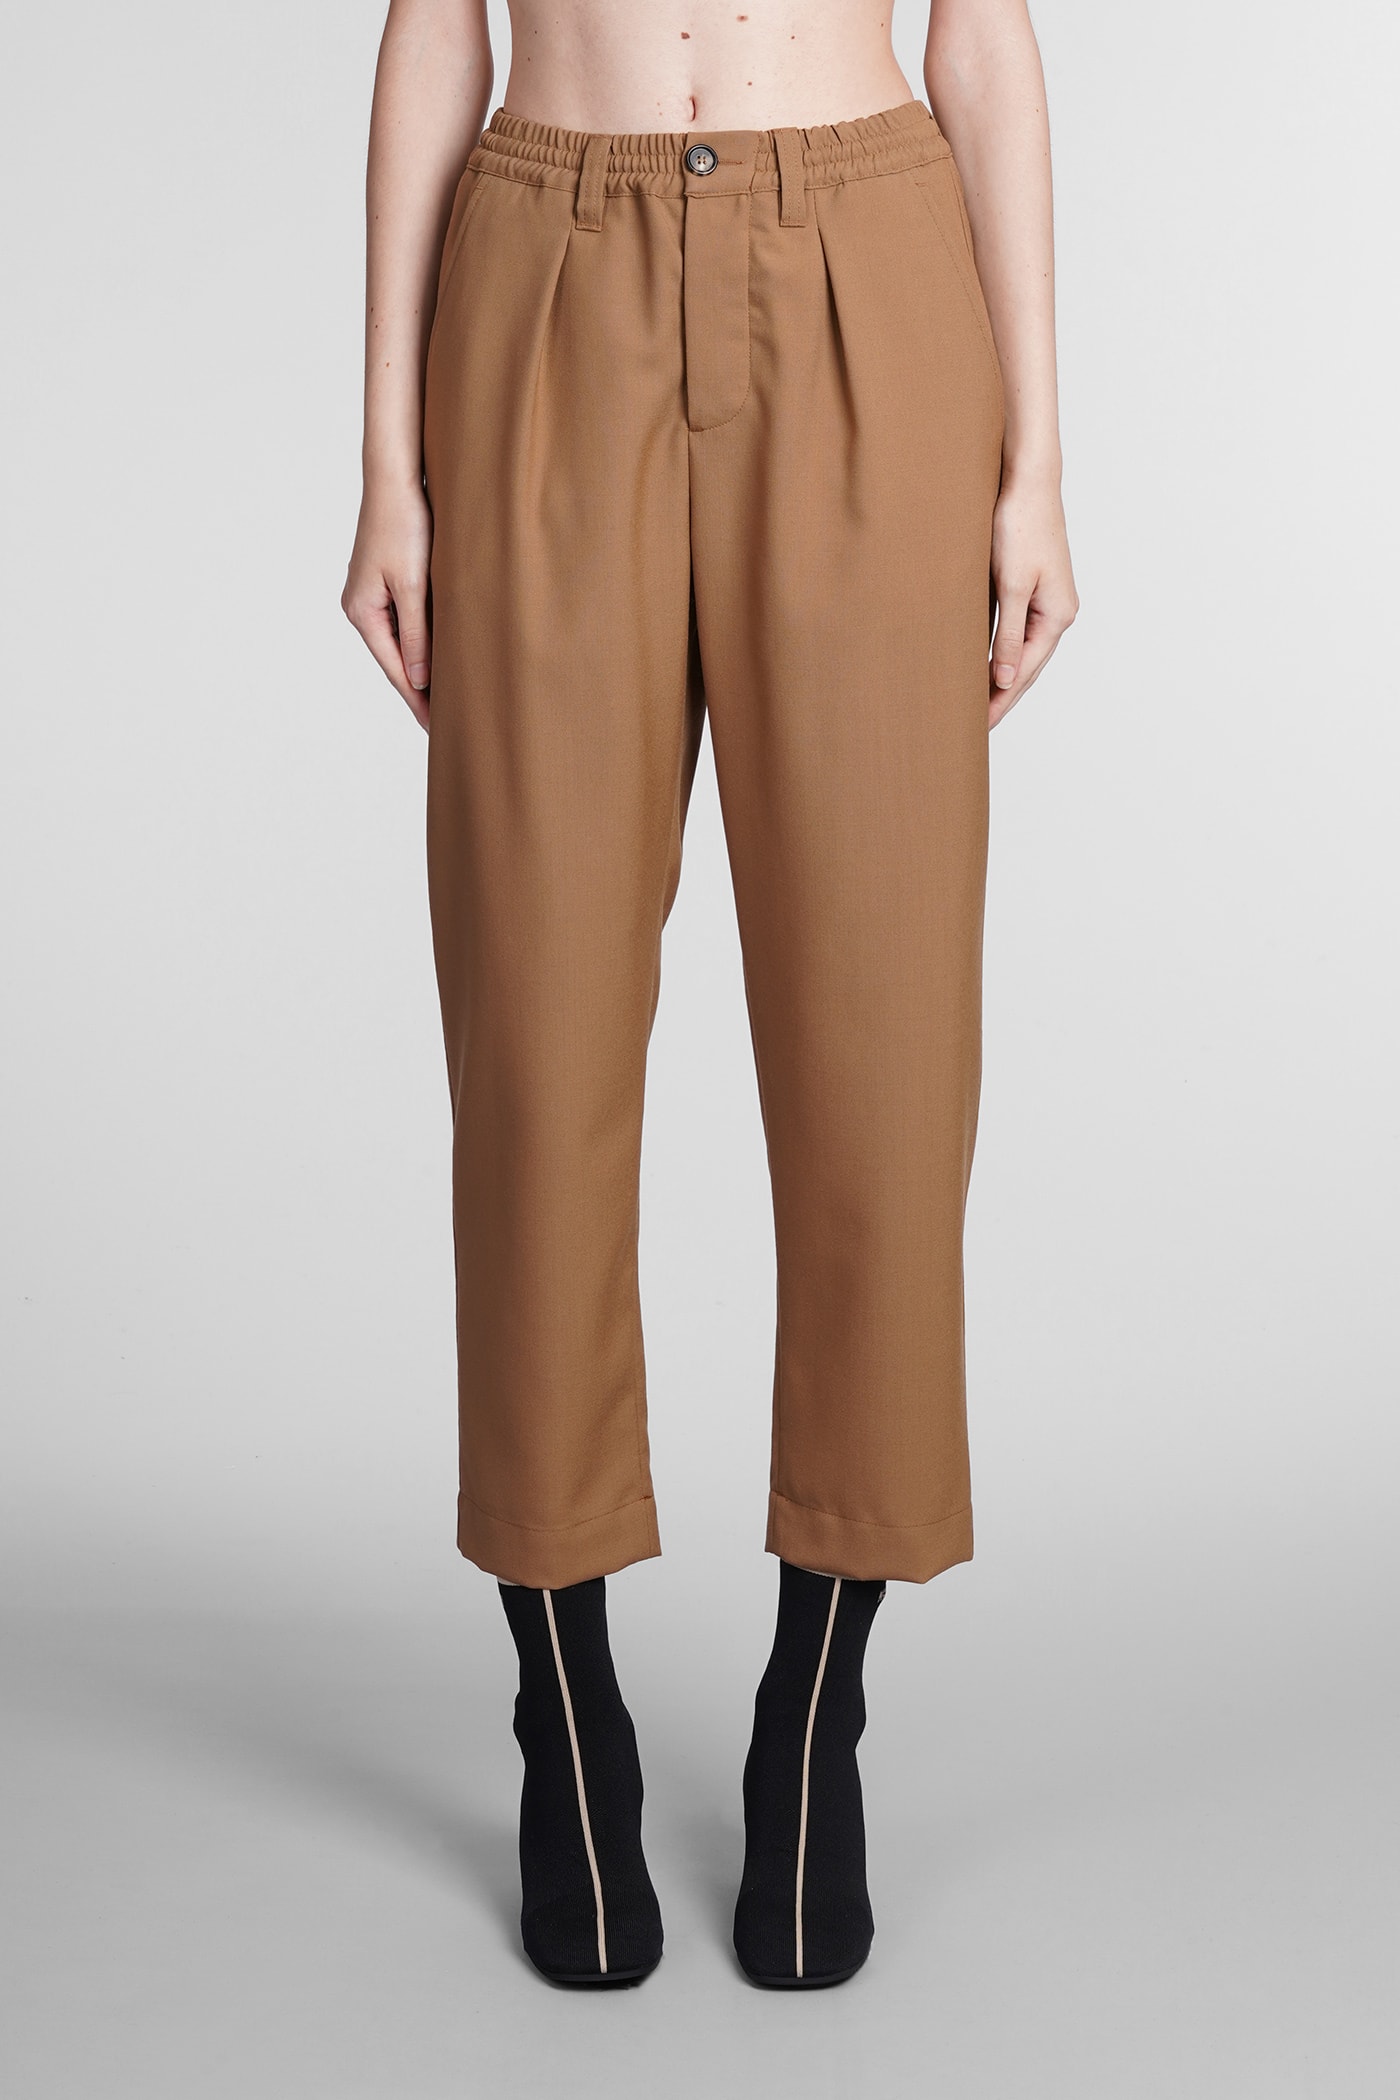 Marni Pants In Leather Color Wool